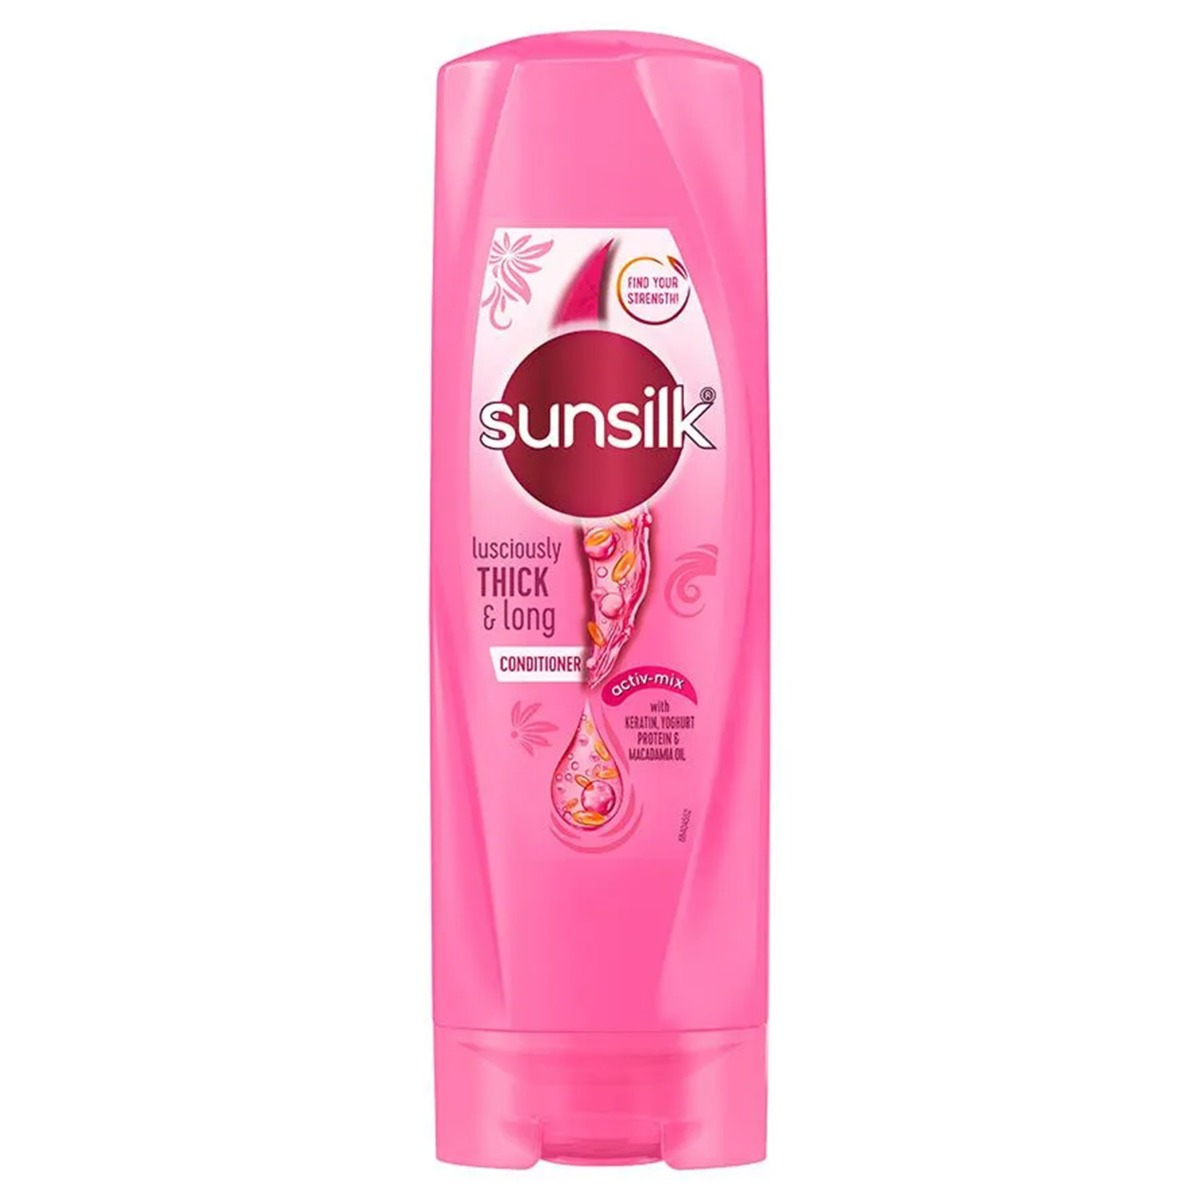 Sunsilk Lusciously Thick & Long Conditioner, 180ml